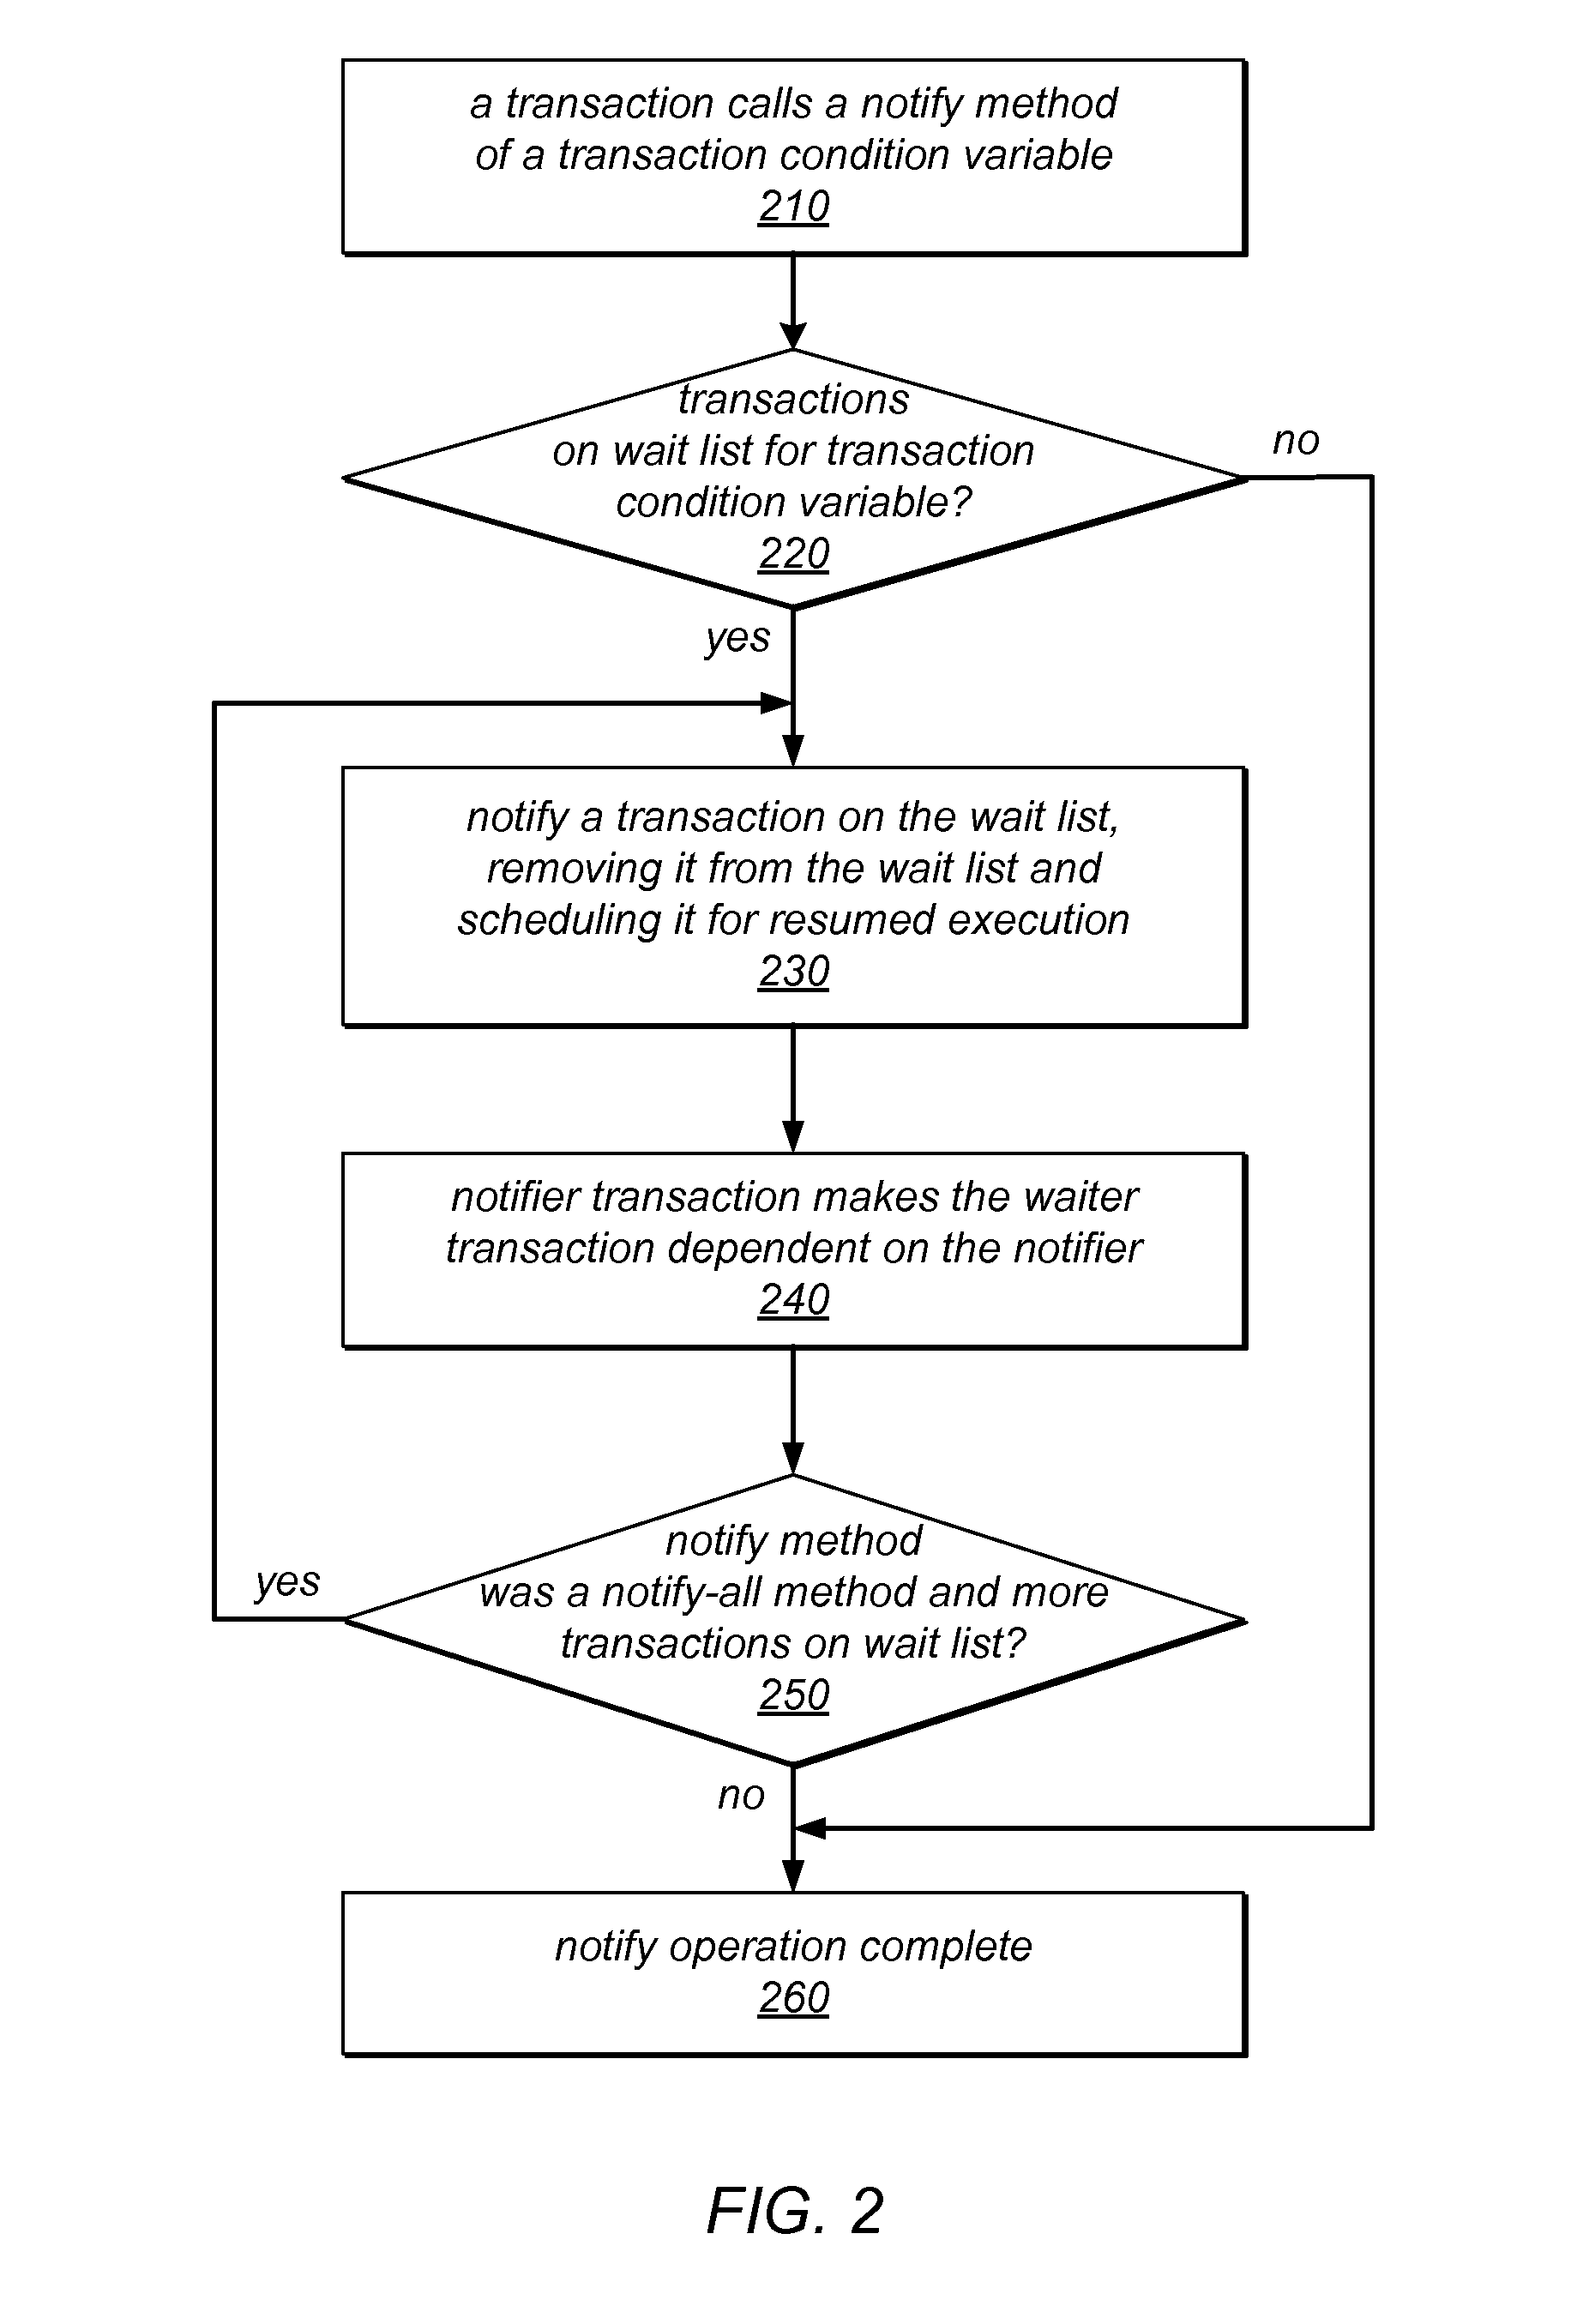 System and Method for Synchronization Between Concurrent Transactions Using Transaction Condition Variables